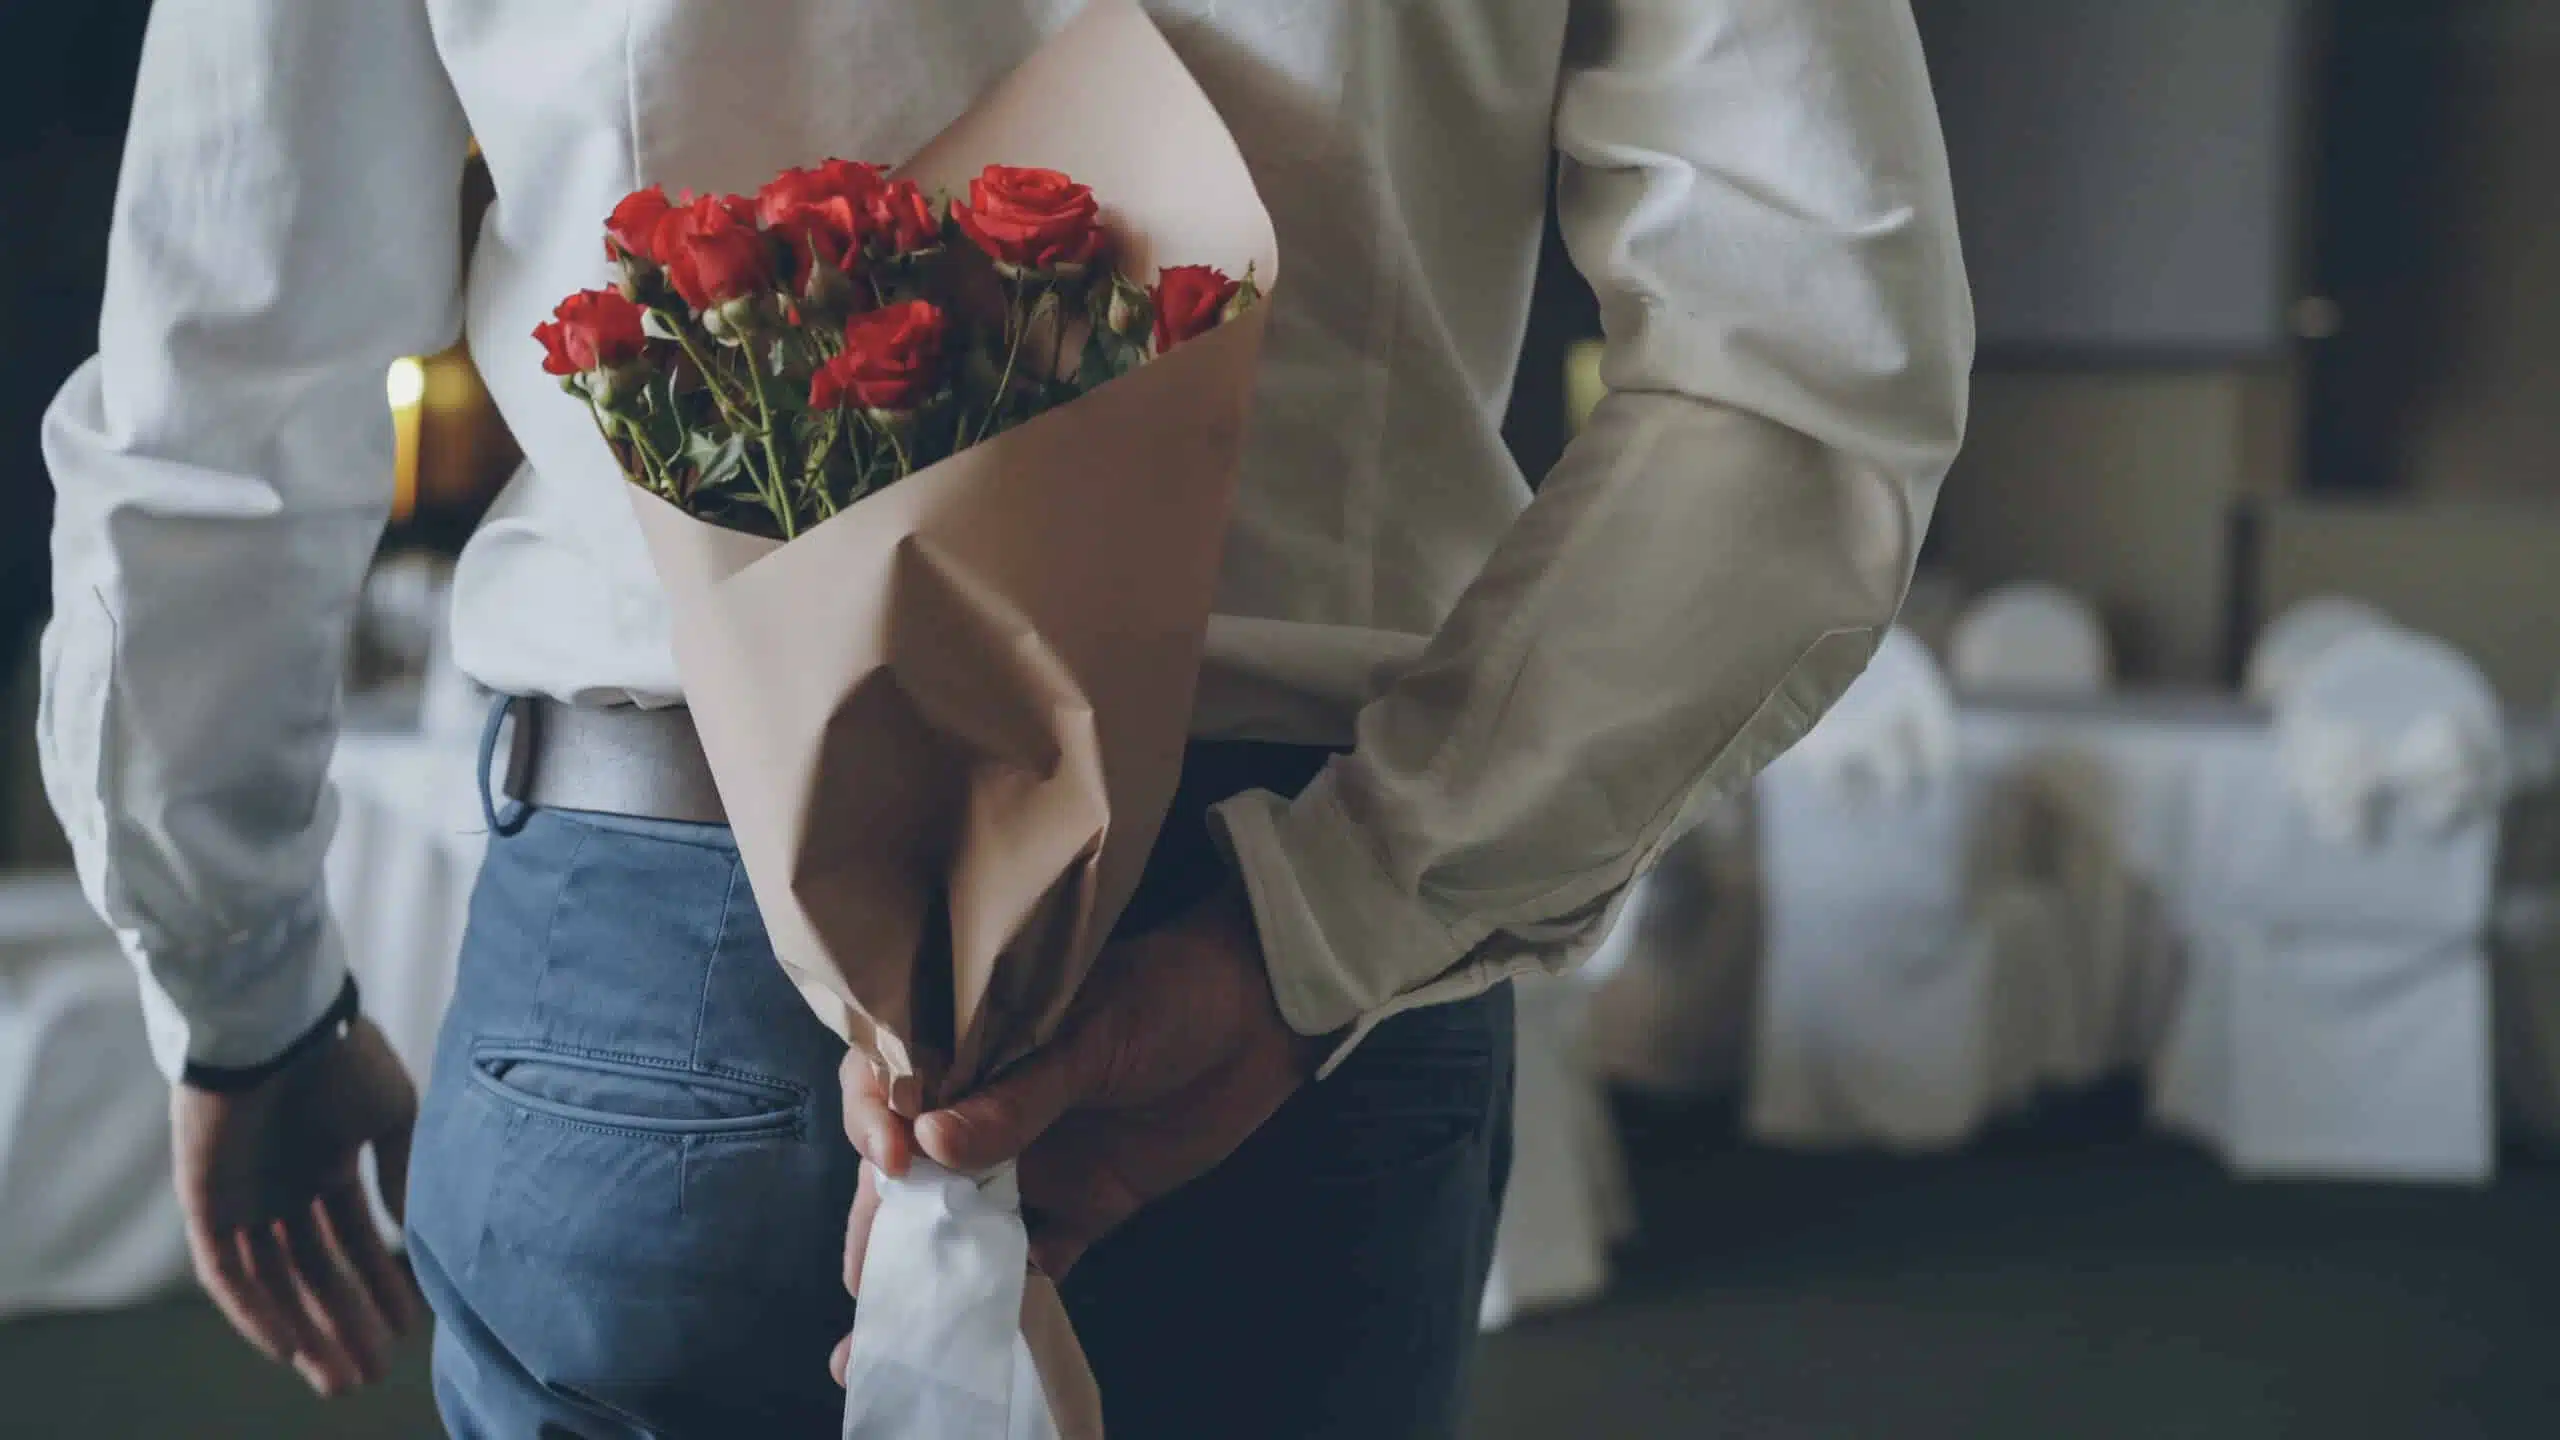 Loving man is hiding red roses behind his back bringing beautiful bouquet for his date in restaurant. Flowers, romantic relationship and dating concept.